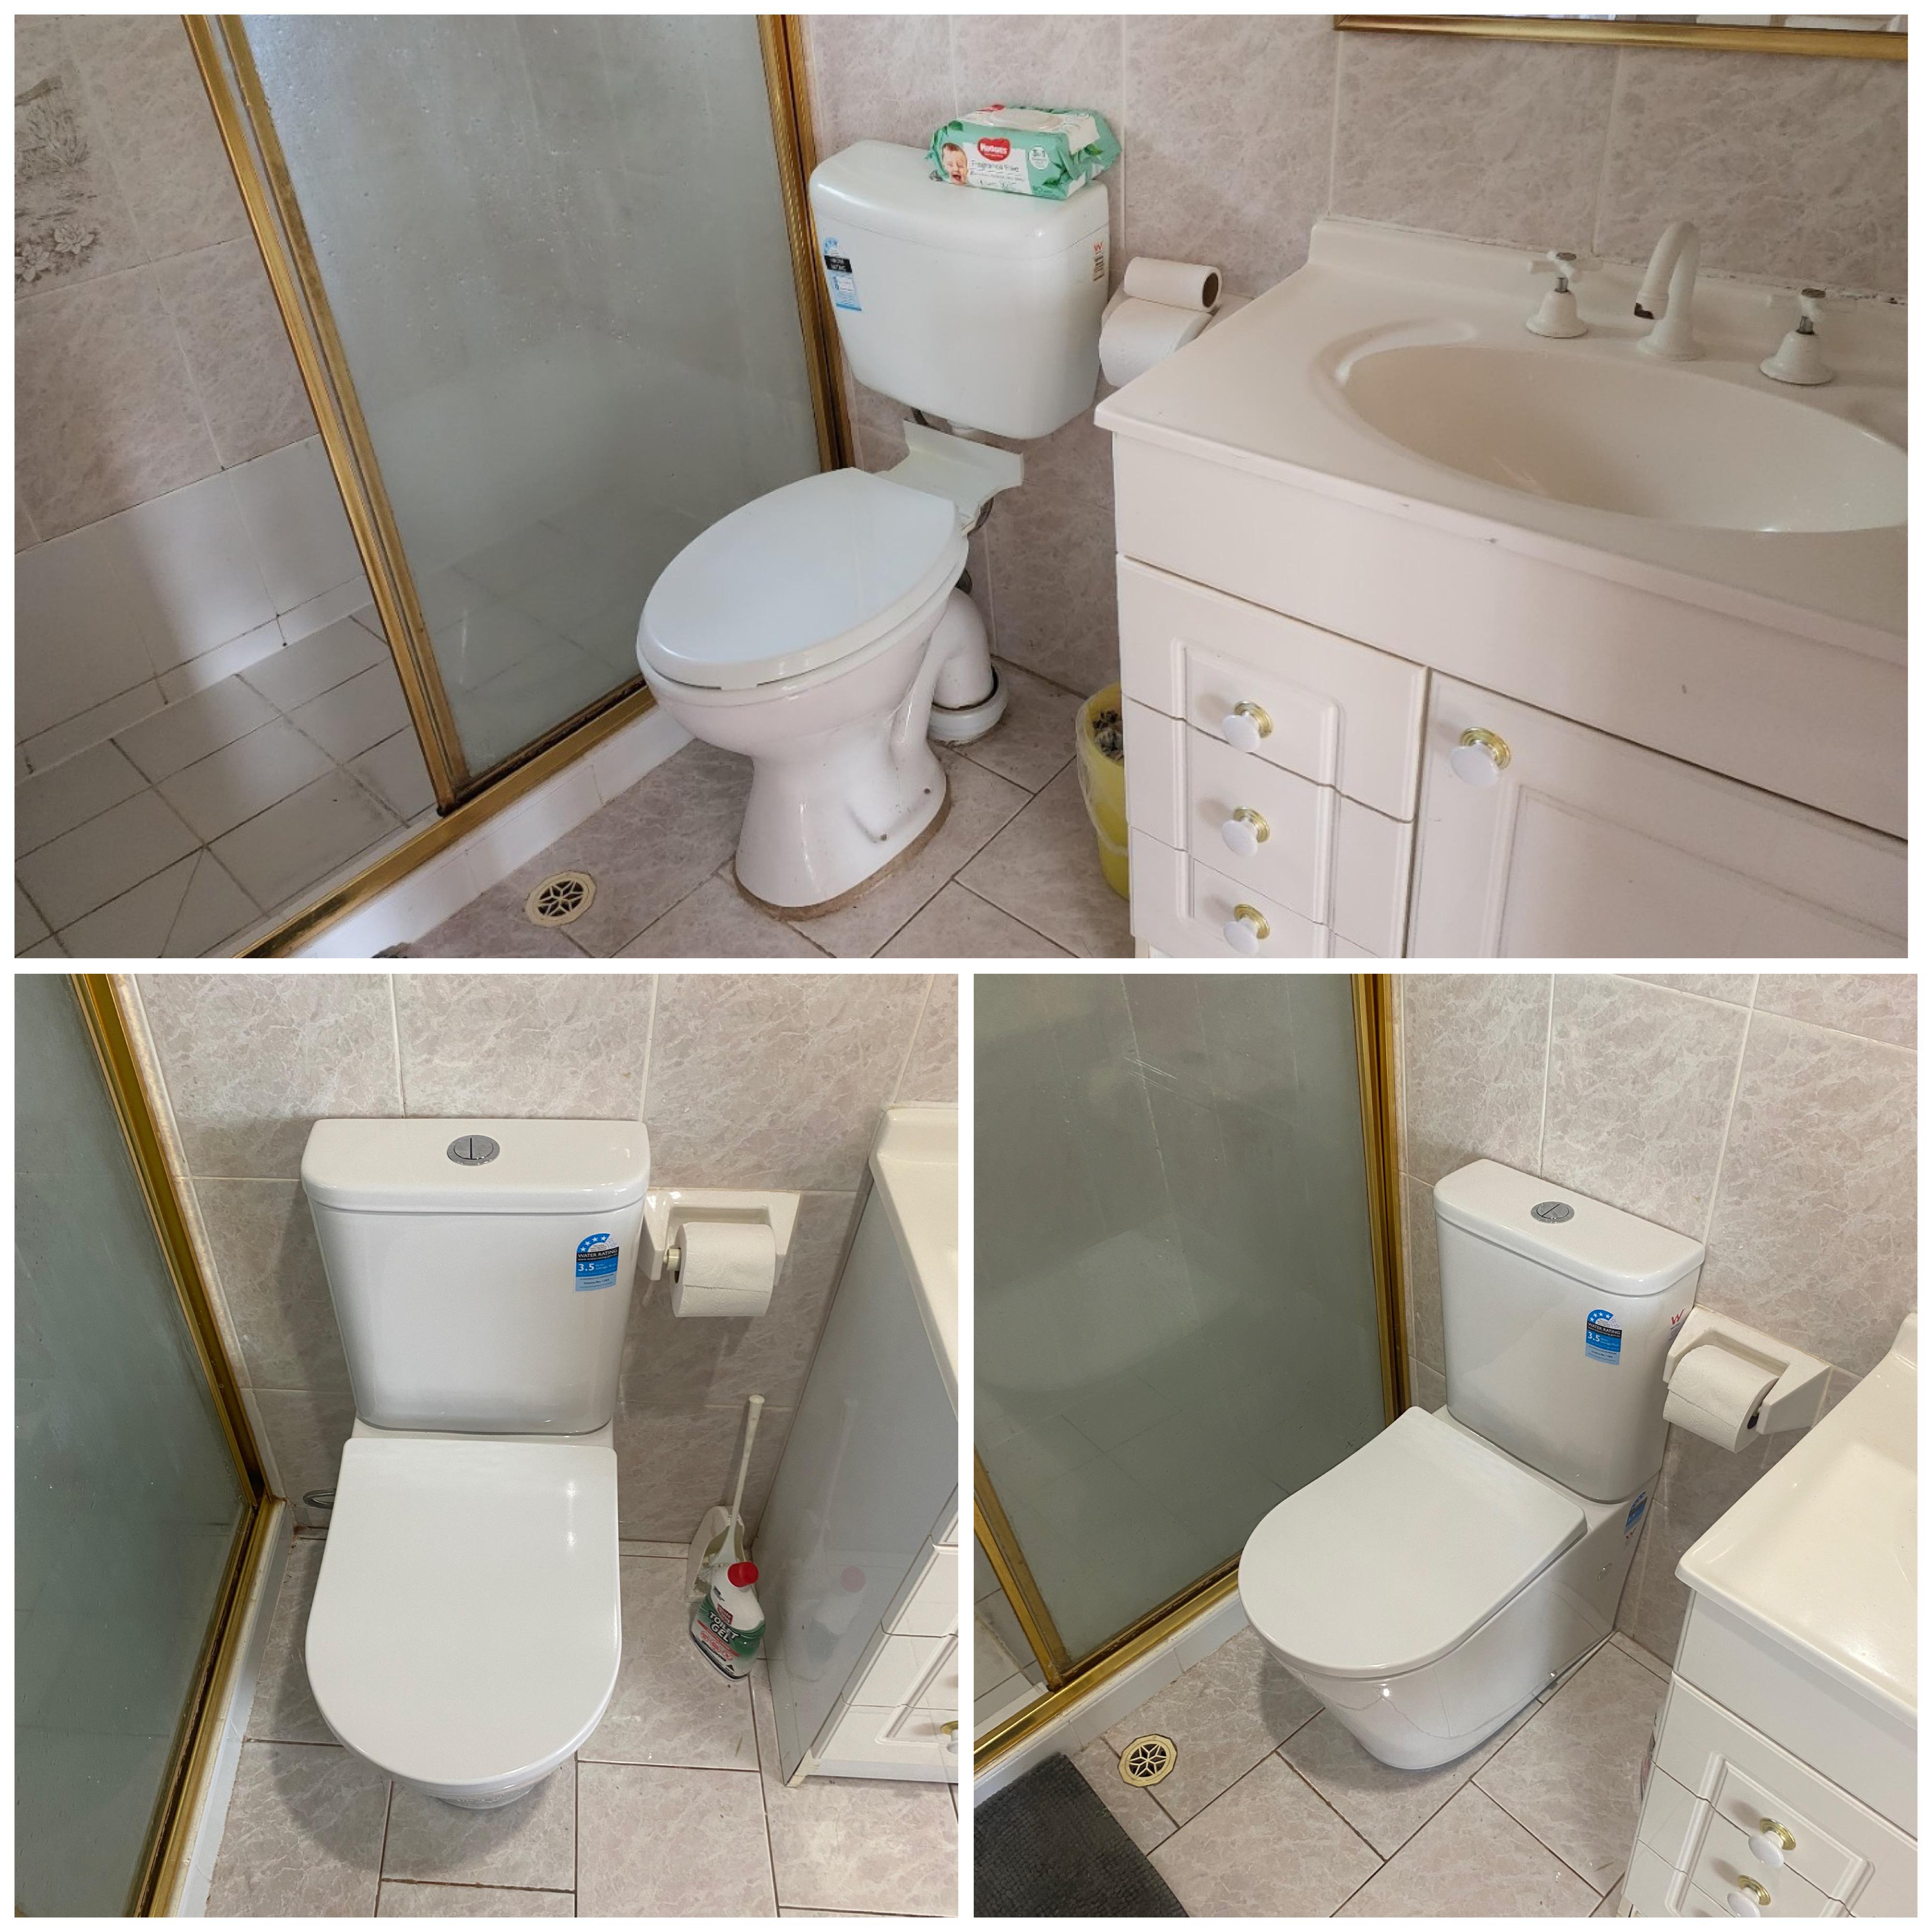 TOILET REPLACEMENTS CRUCIAL Plumbing Services Pty Ltd Seven Hills (02) 8041 4999